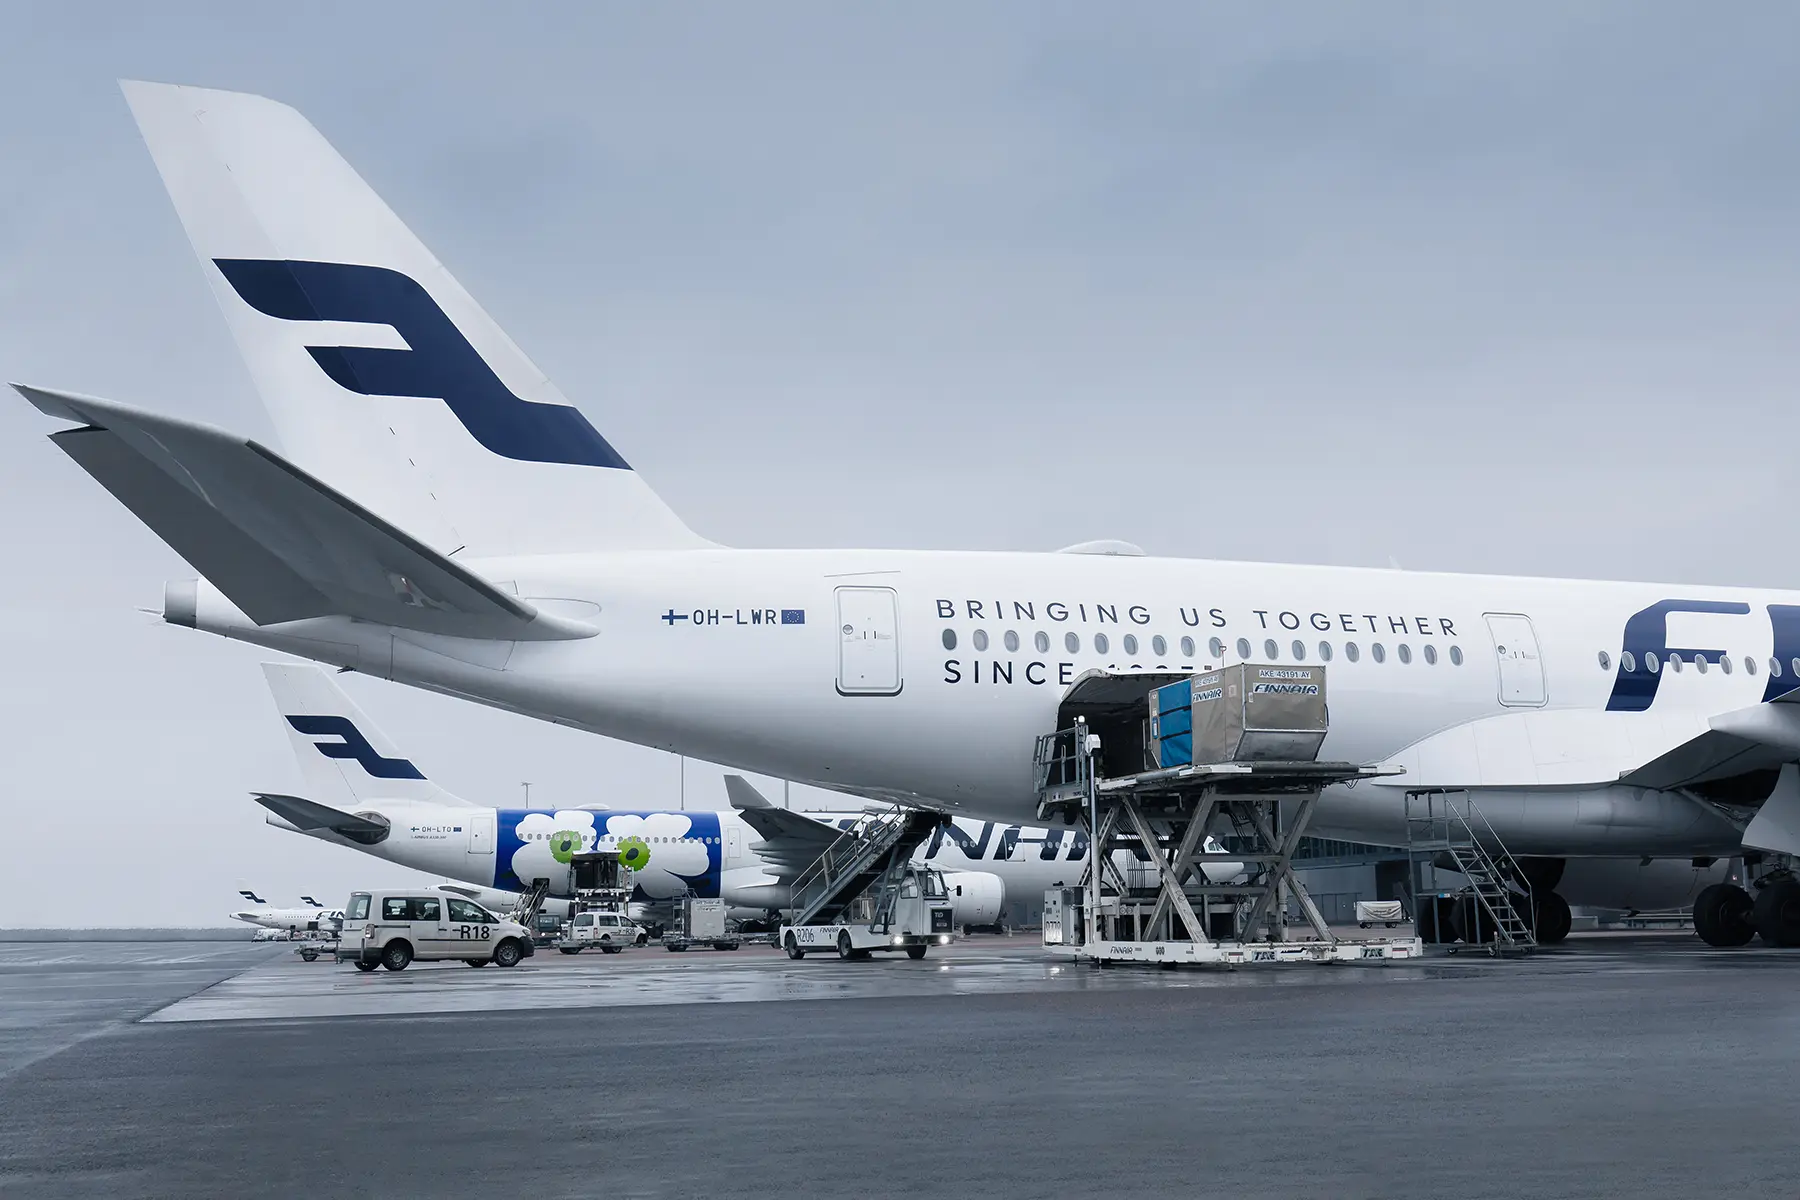 fly finnair with qantas points and save money